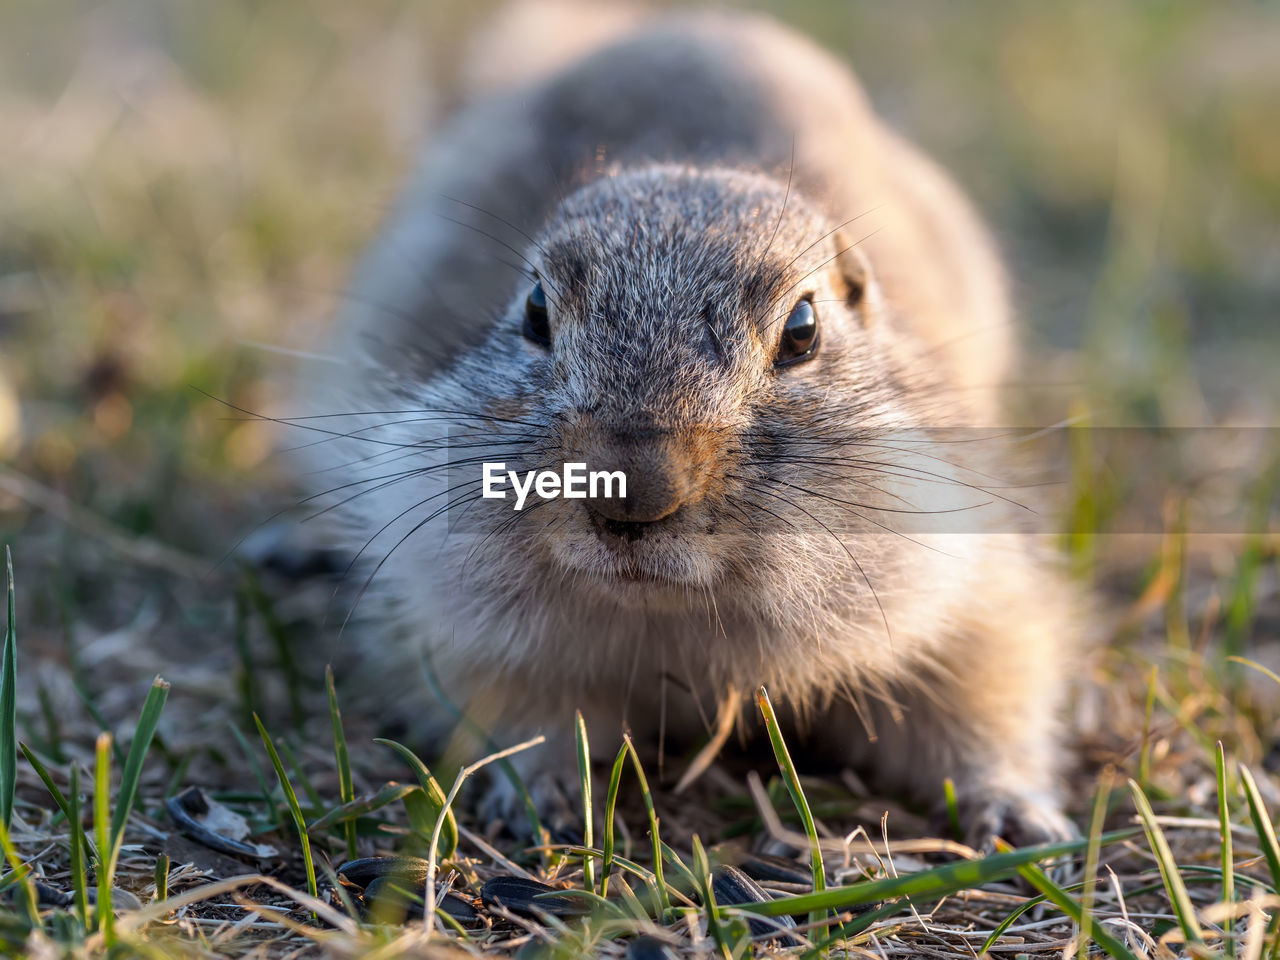 animal, animal themes, animal wildlife, one animal, mammal, wildlife, whiskers, portrait, looking at camera, rodent, nature, no people, prairie dog, squirrel, cute, grass, close-up, outdoors, front view, animal body part, day, plant, animal hair